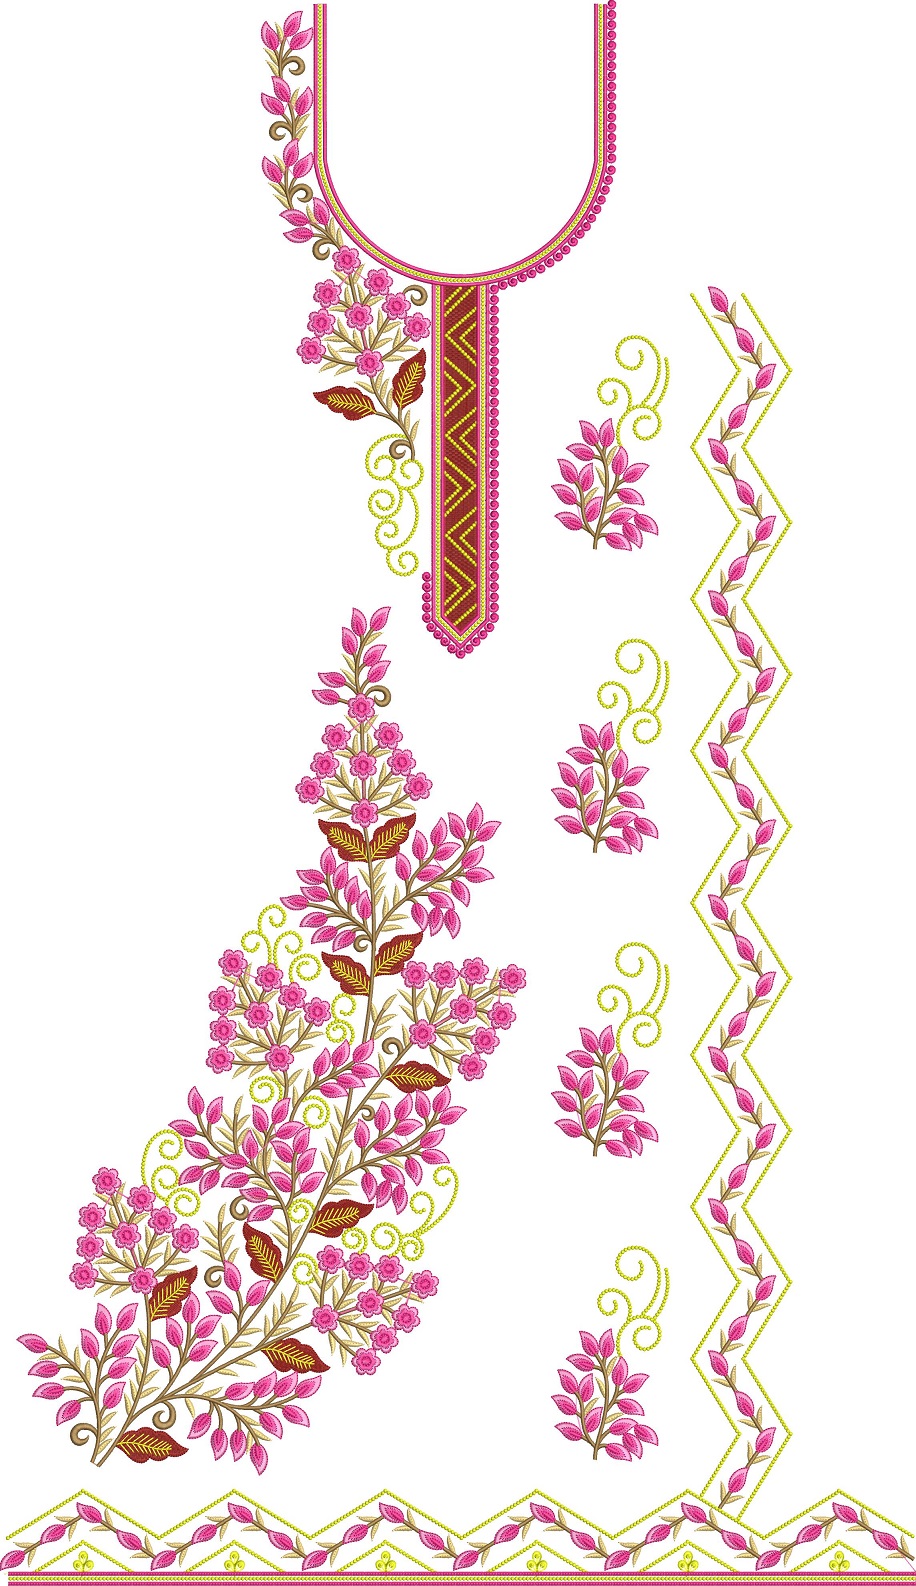 Dresses for Ladess in new Embroidery design Download